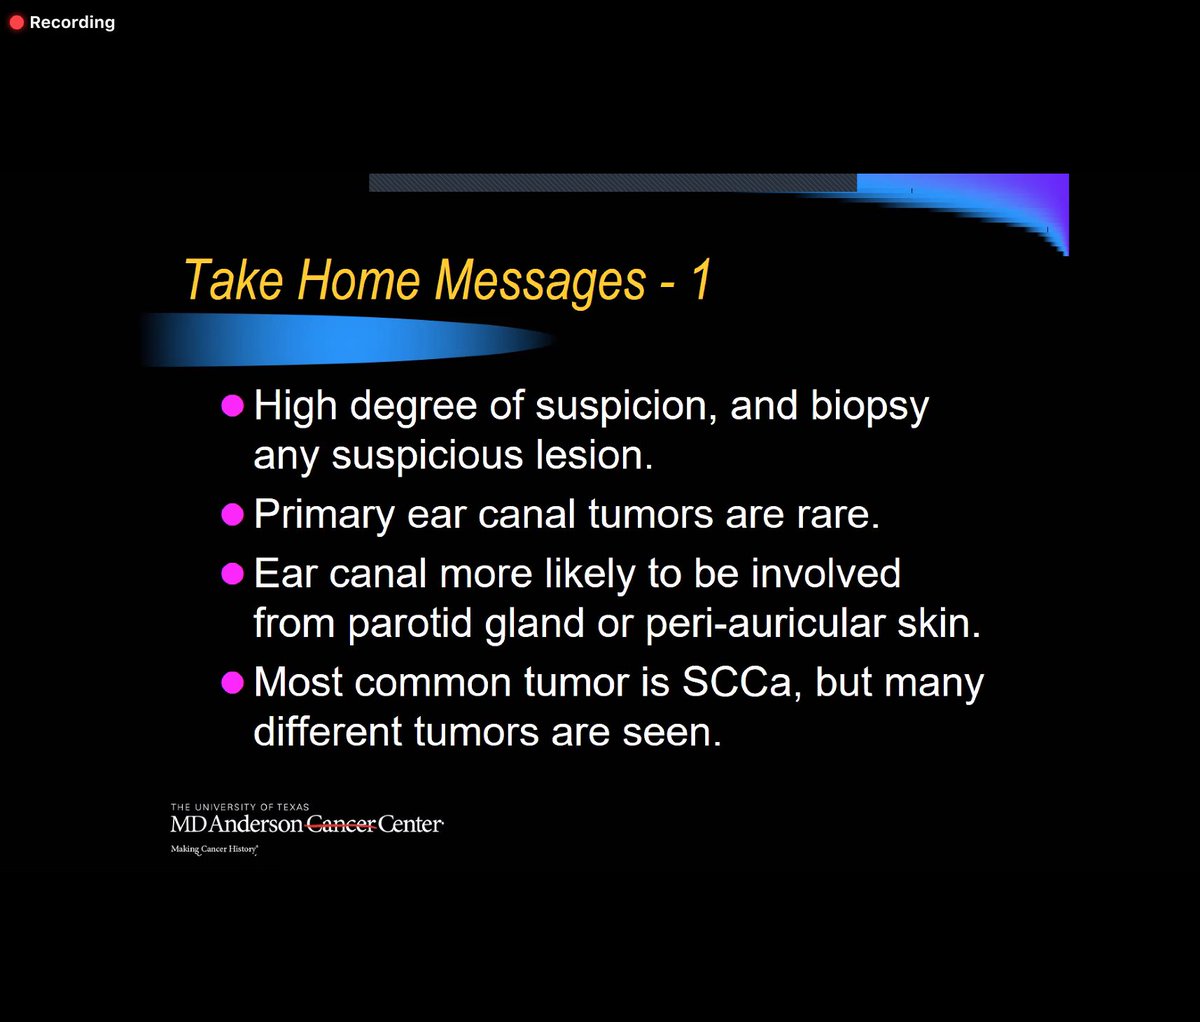 In-depth presentation from @MDAndersonNews's @PaulGidleyMD on temporal bone cancer this AM, fortunate to have this experience as part of my #neurotologyfellowship training #temporalbone #headandneckcancer
>onlinelibrary.wiley.com/doi/abs/10.100…
>onlinelibrary.wiley.com/doi/abs/10.100…
>onlinelibrary.wiley.com/doi/full/10.10…